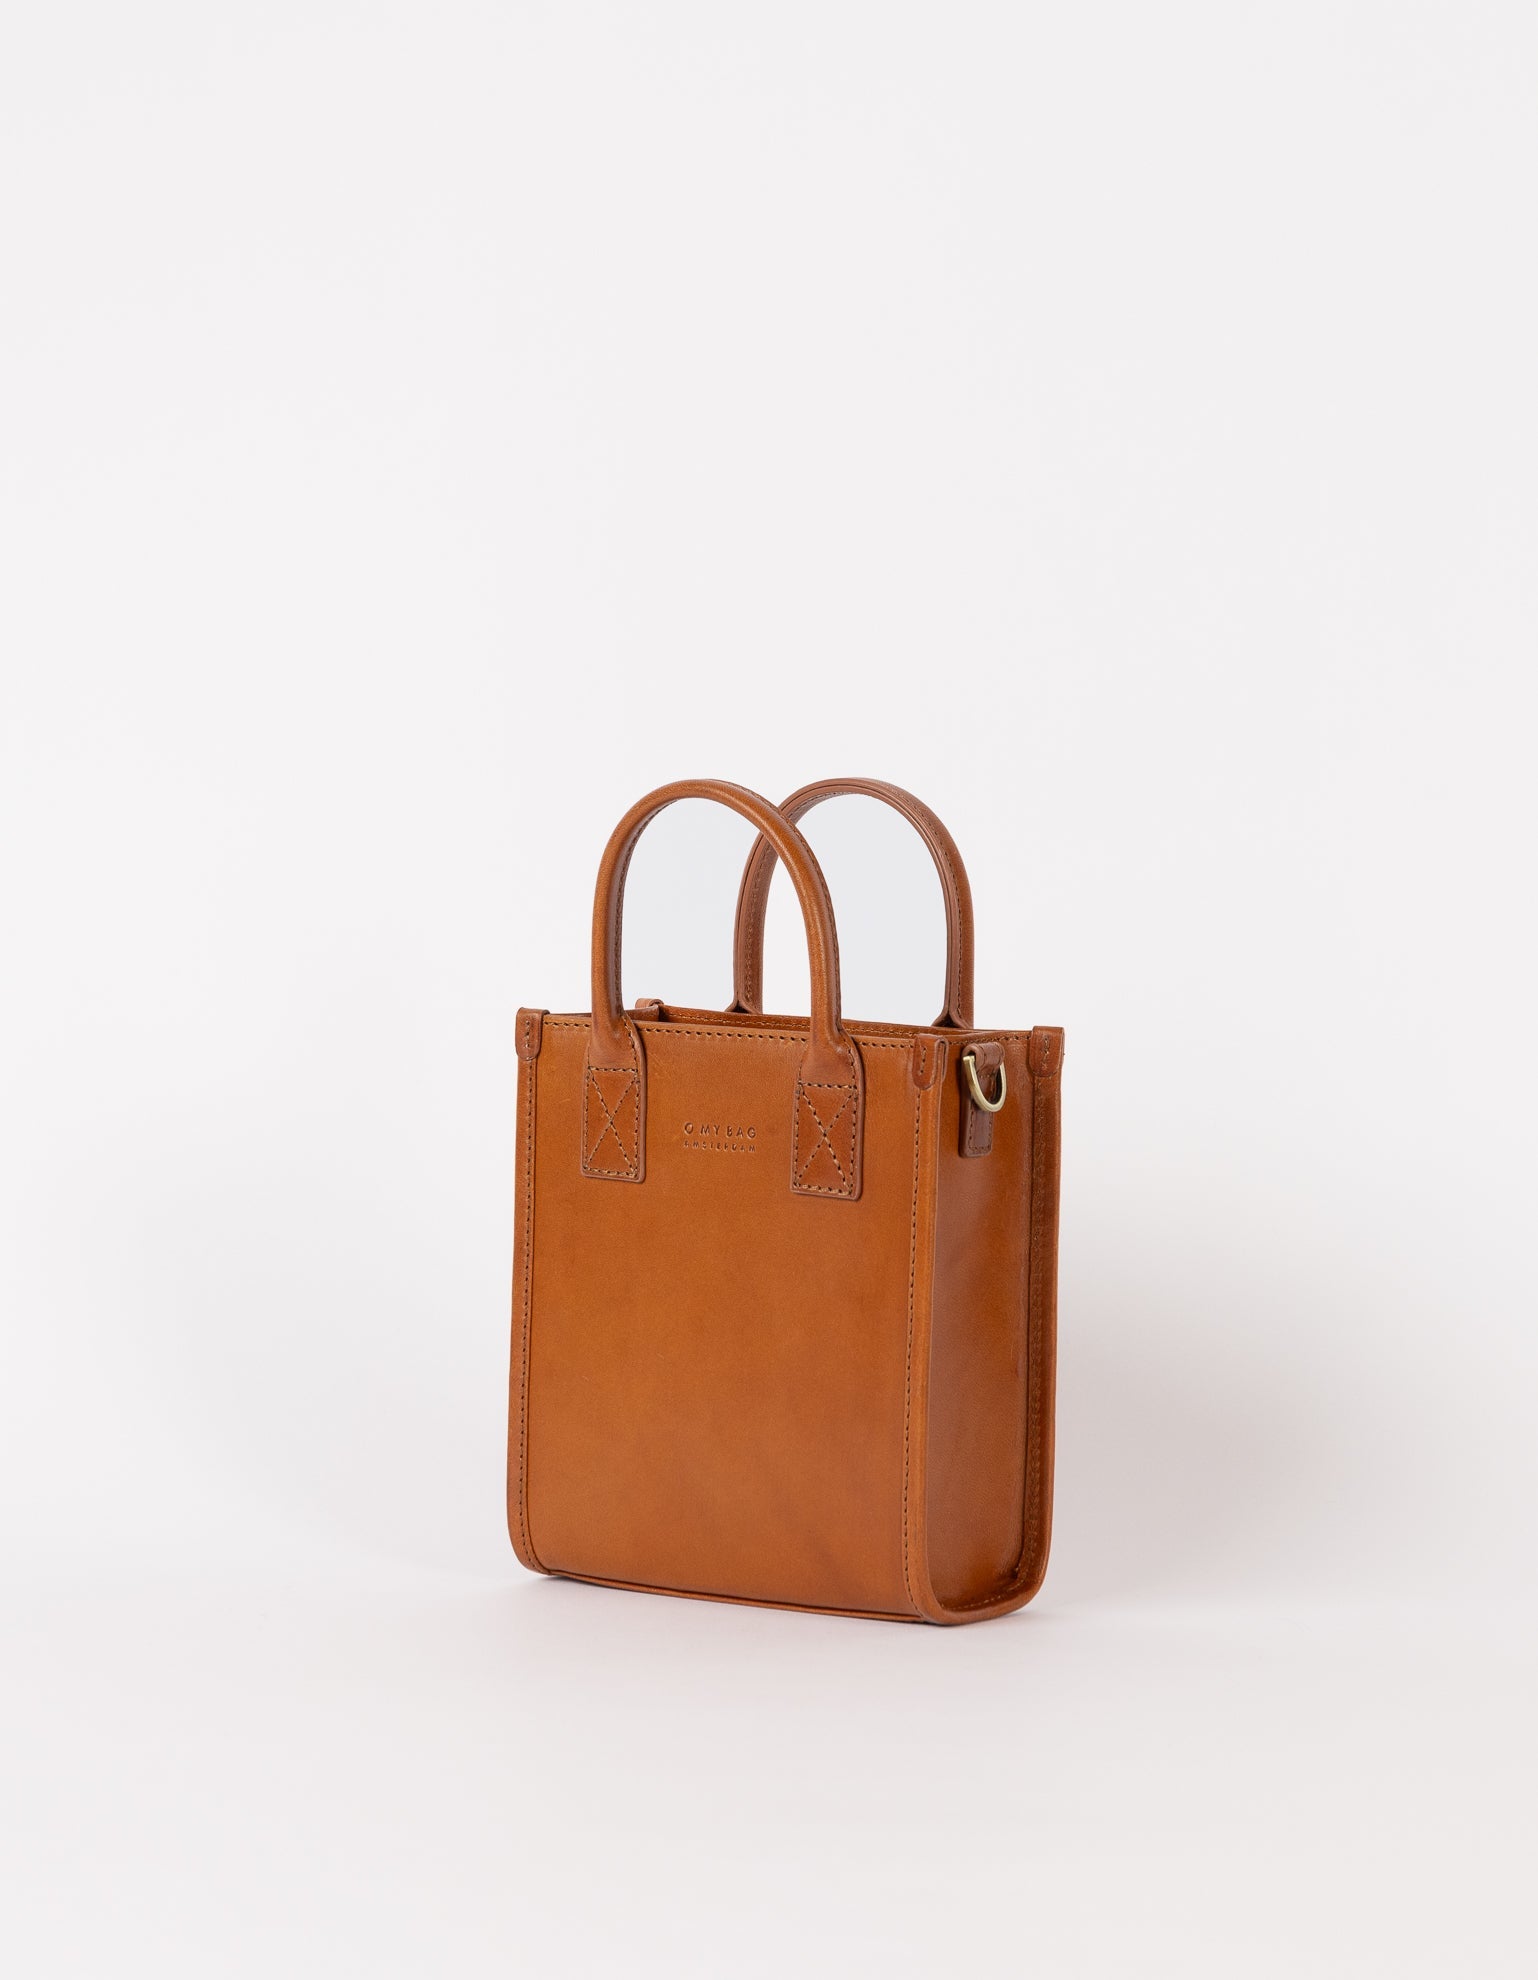 o my bag jackie mini leather bag ethically made in india with sustainable leather